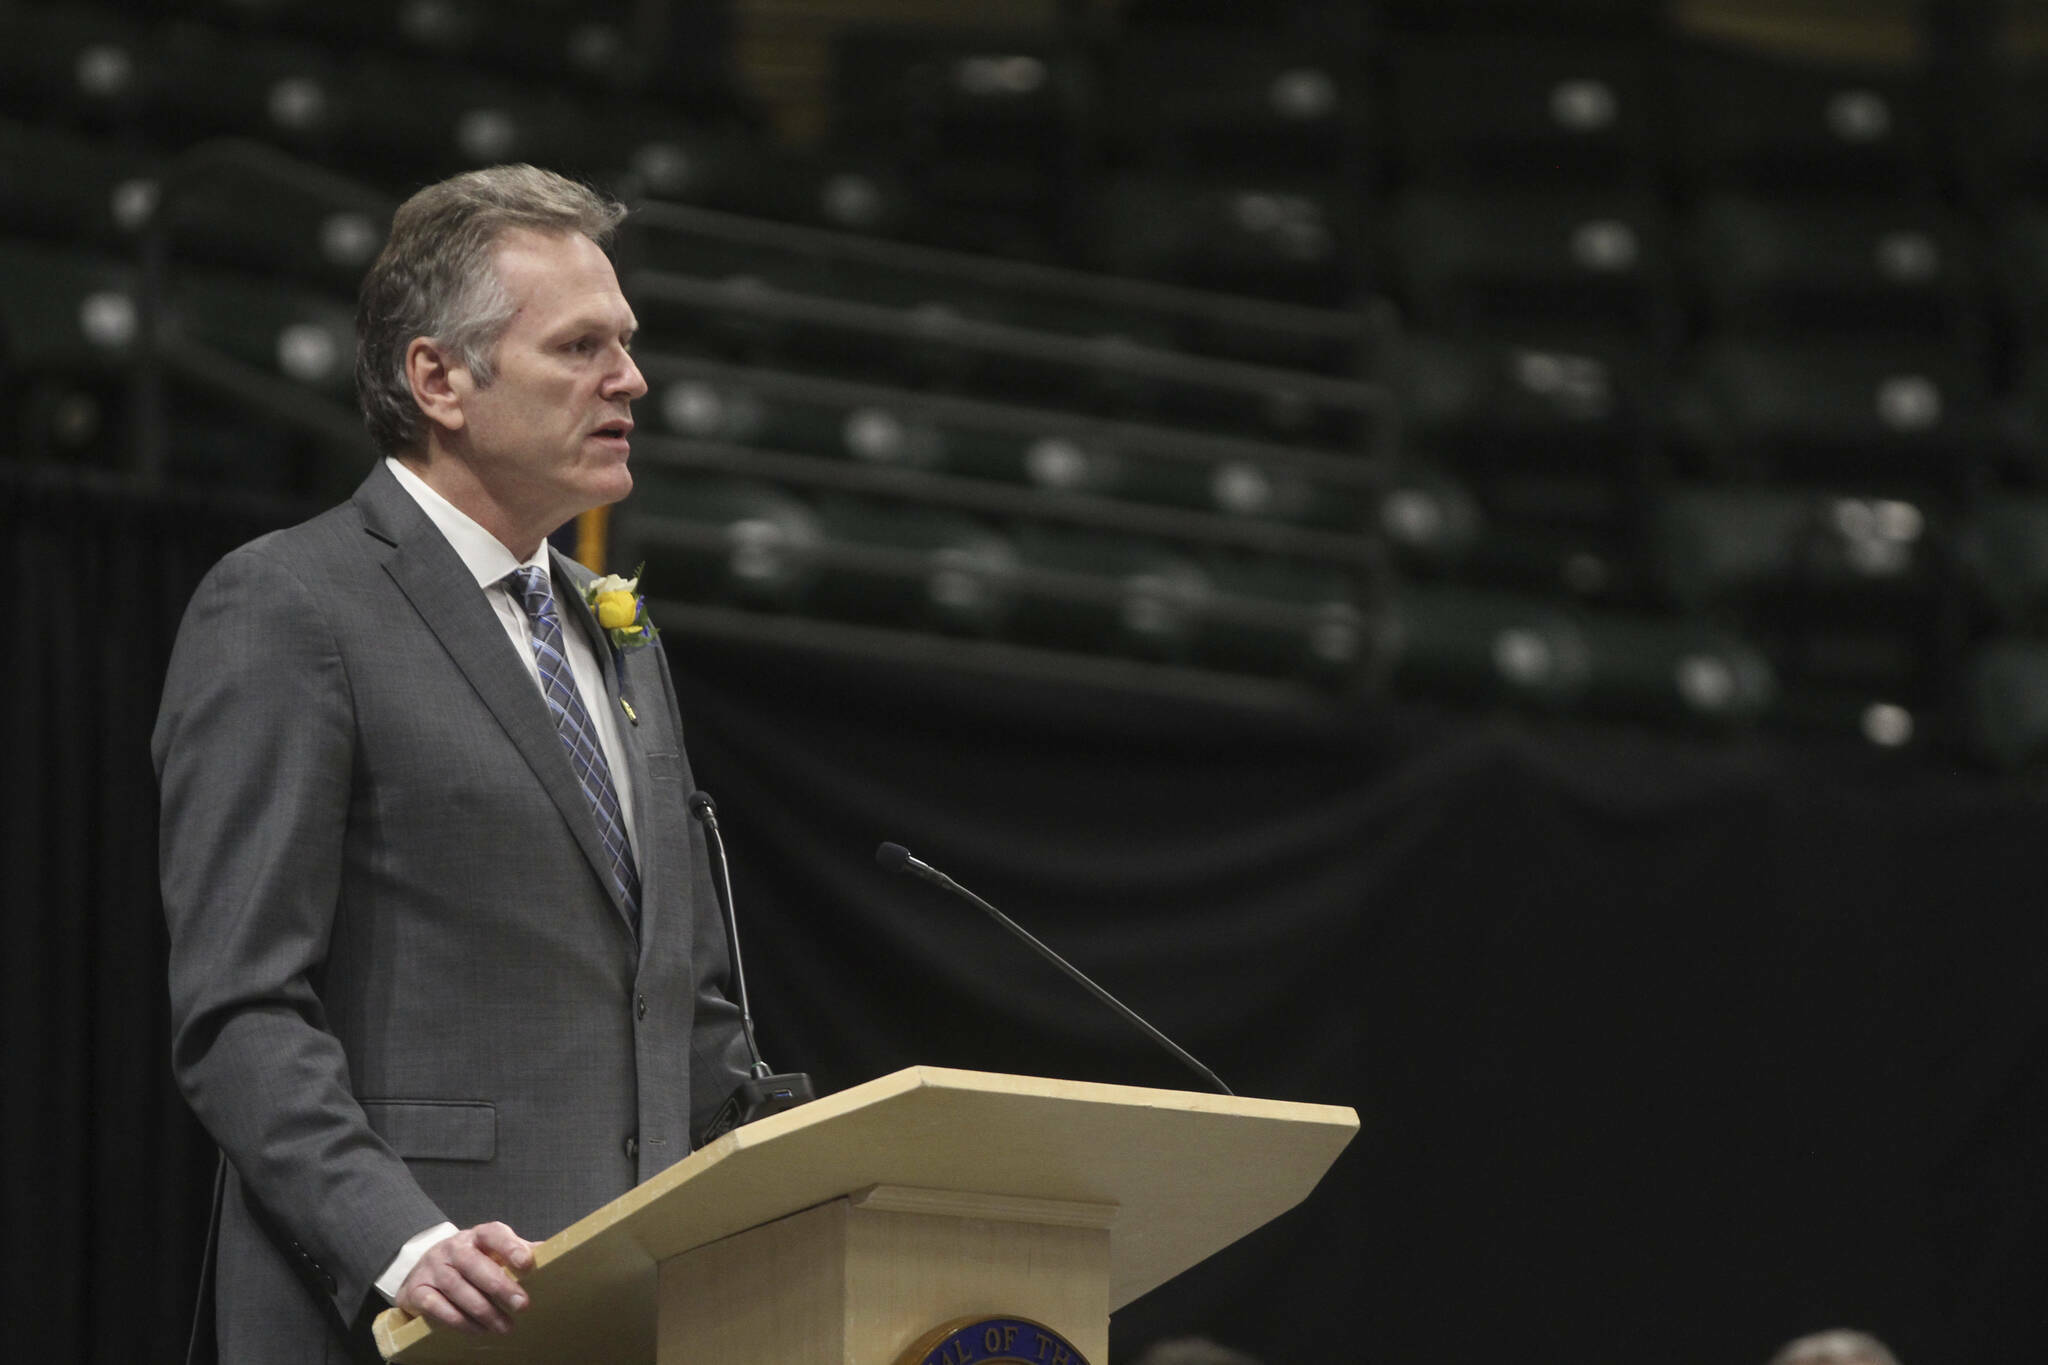 Gov. Mike Dunleavy addresses the audience during his inauguration ceremony Monday, Dec. 5, 2022, in Anchorage. (AP Photo/Mark Thiessen)